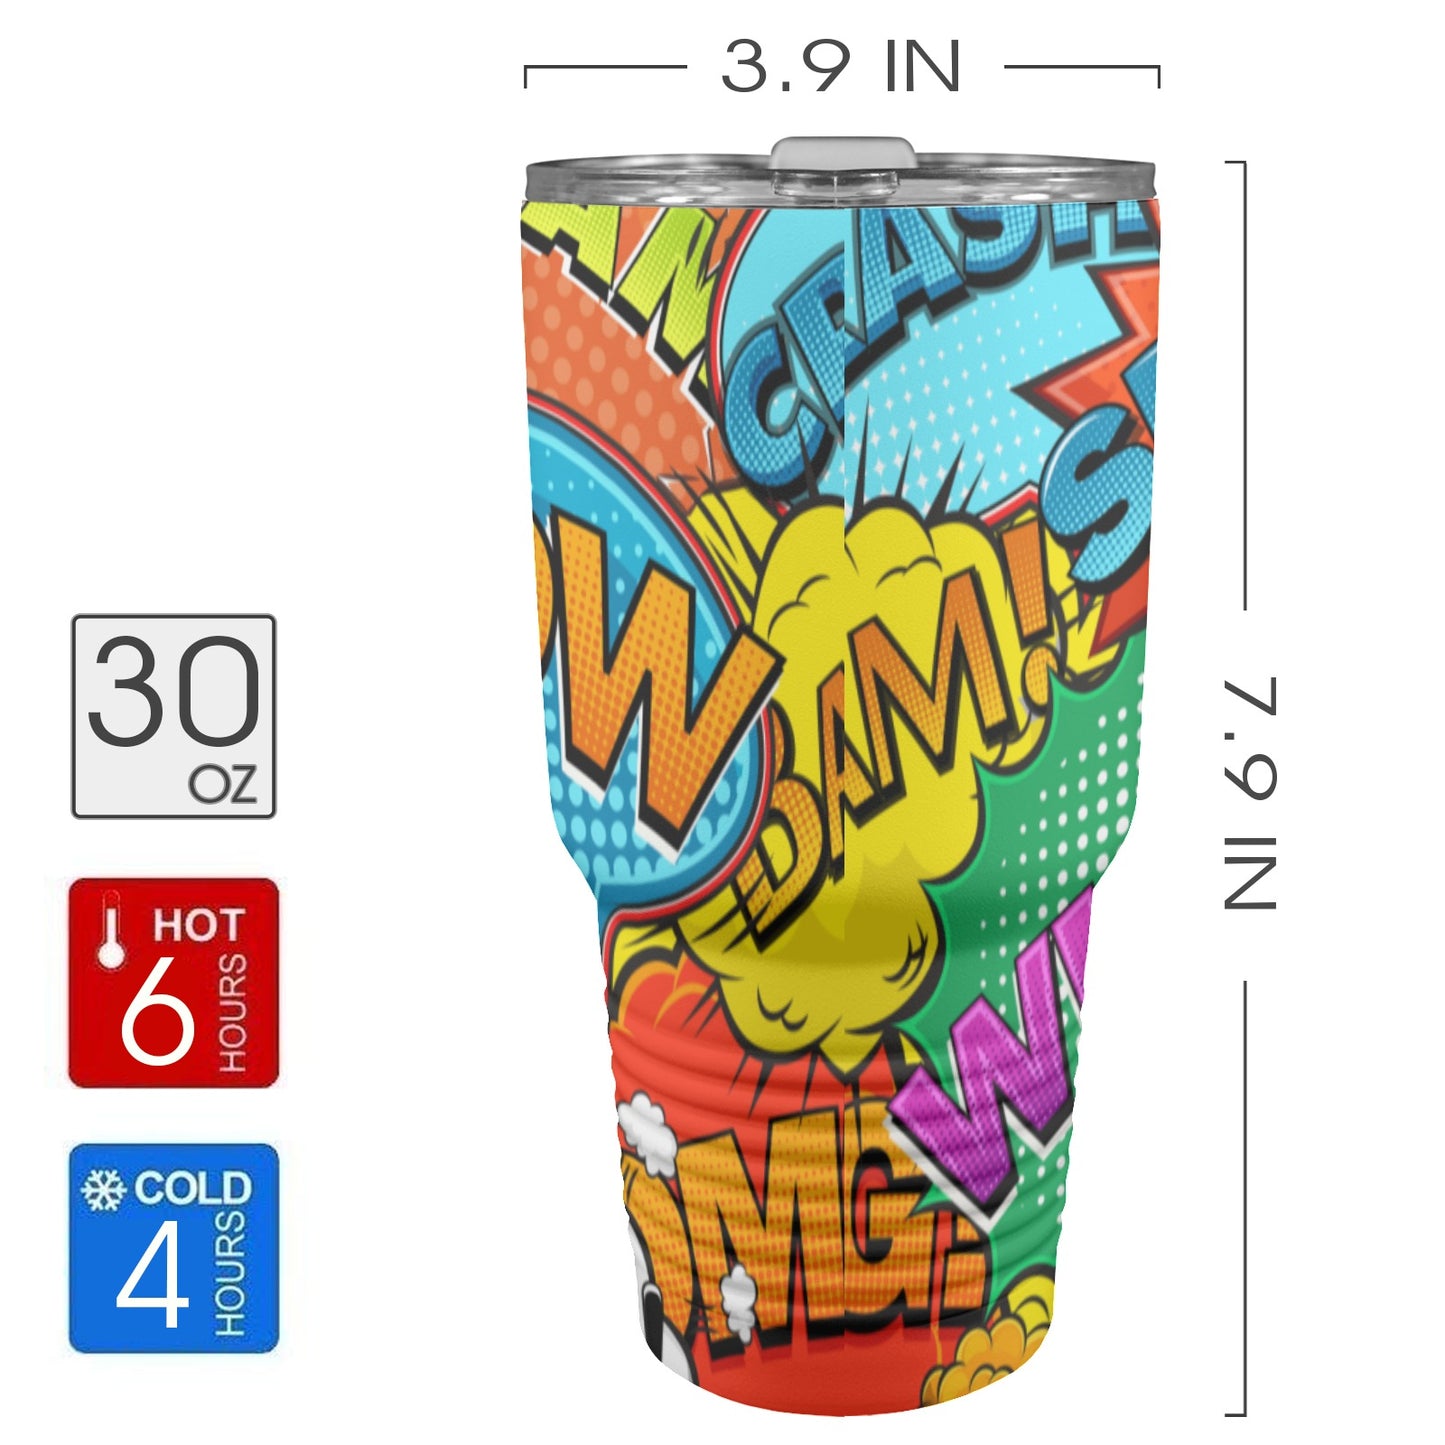 Comic Book 2 - 30oz Insulated Stainless Steel Mobile Tumbler 30oz Insulated Stainless Steel Mobile Tumbler comic